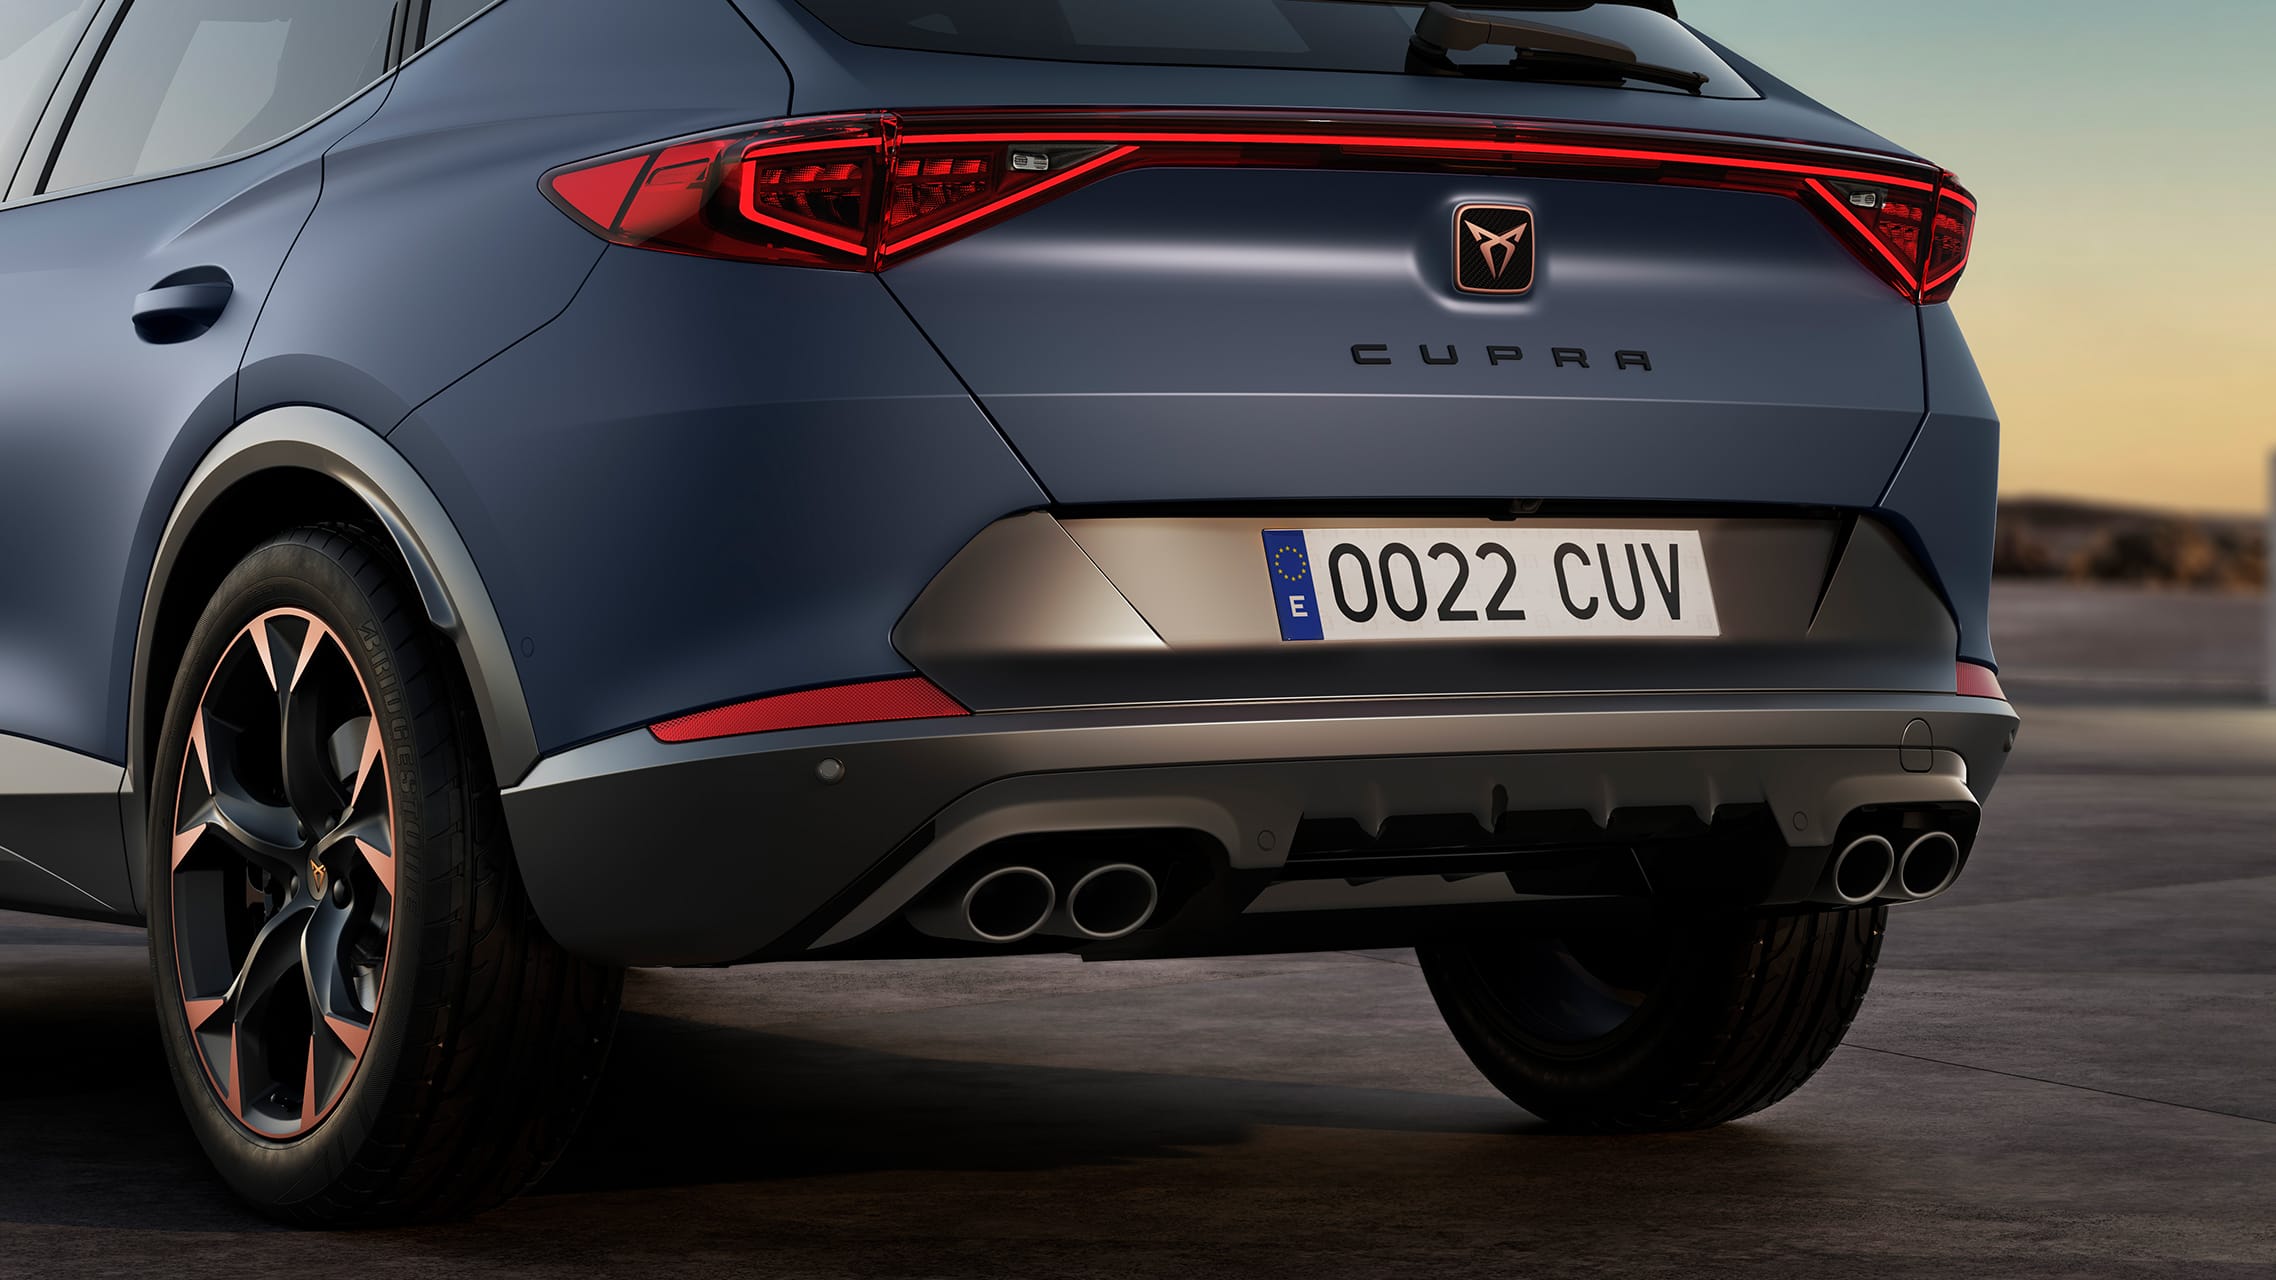 https://www.cupraofficial.es/content/dam/public/cupra-website/cars/cupra-range/formentor/overlay-design-exterior/gallery-component-features-sophisticated-sporting-prime/x-large/02-new-cupra-formentor-compact-suv-twin-tailpipes-sin-sport-black-matte.jpg